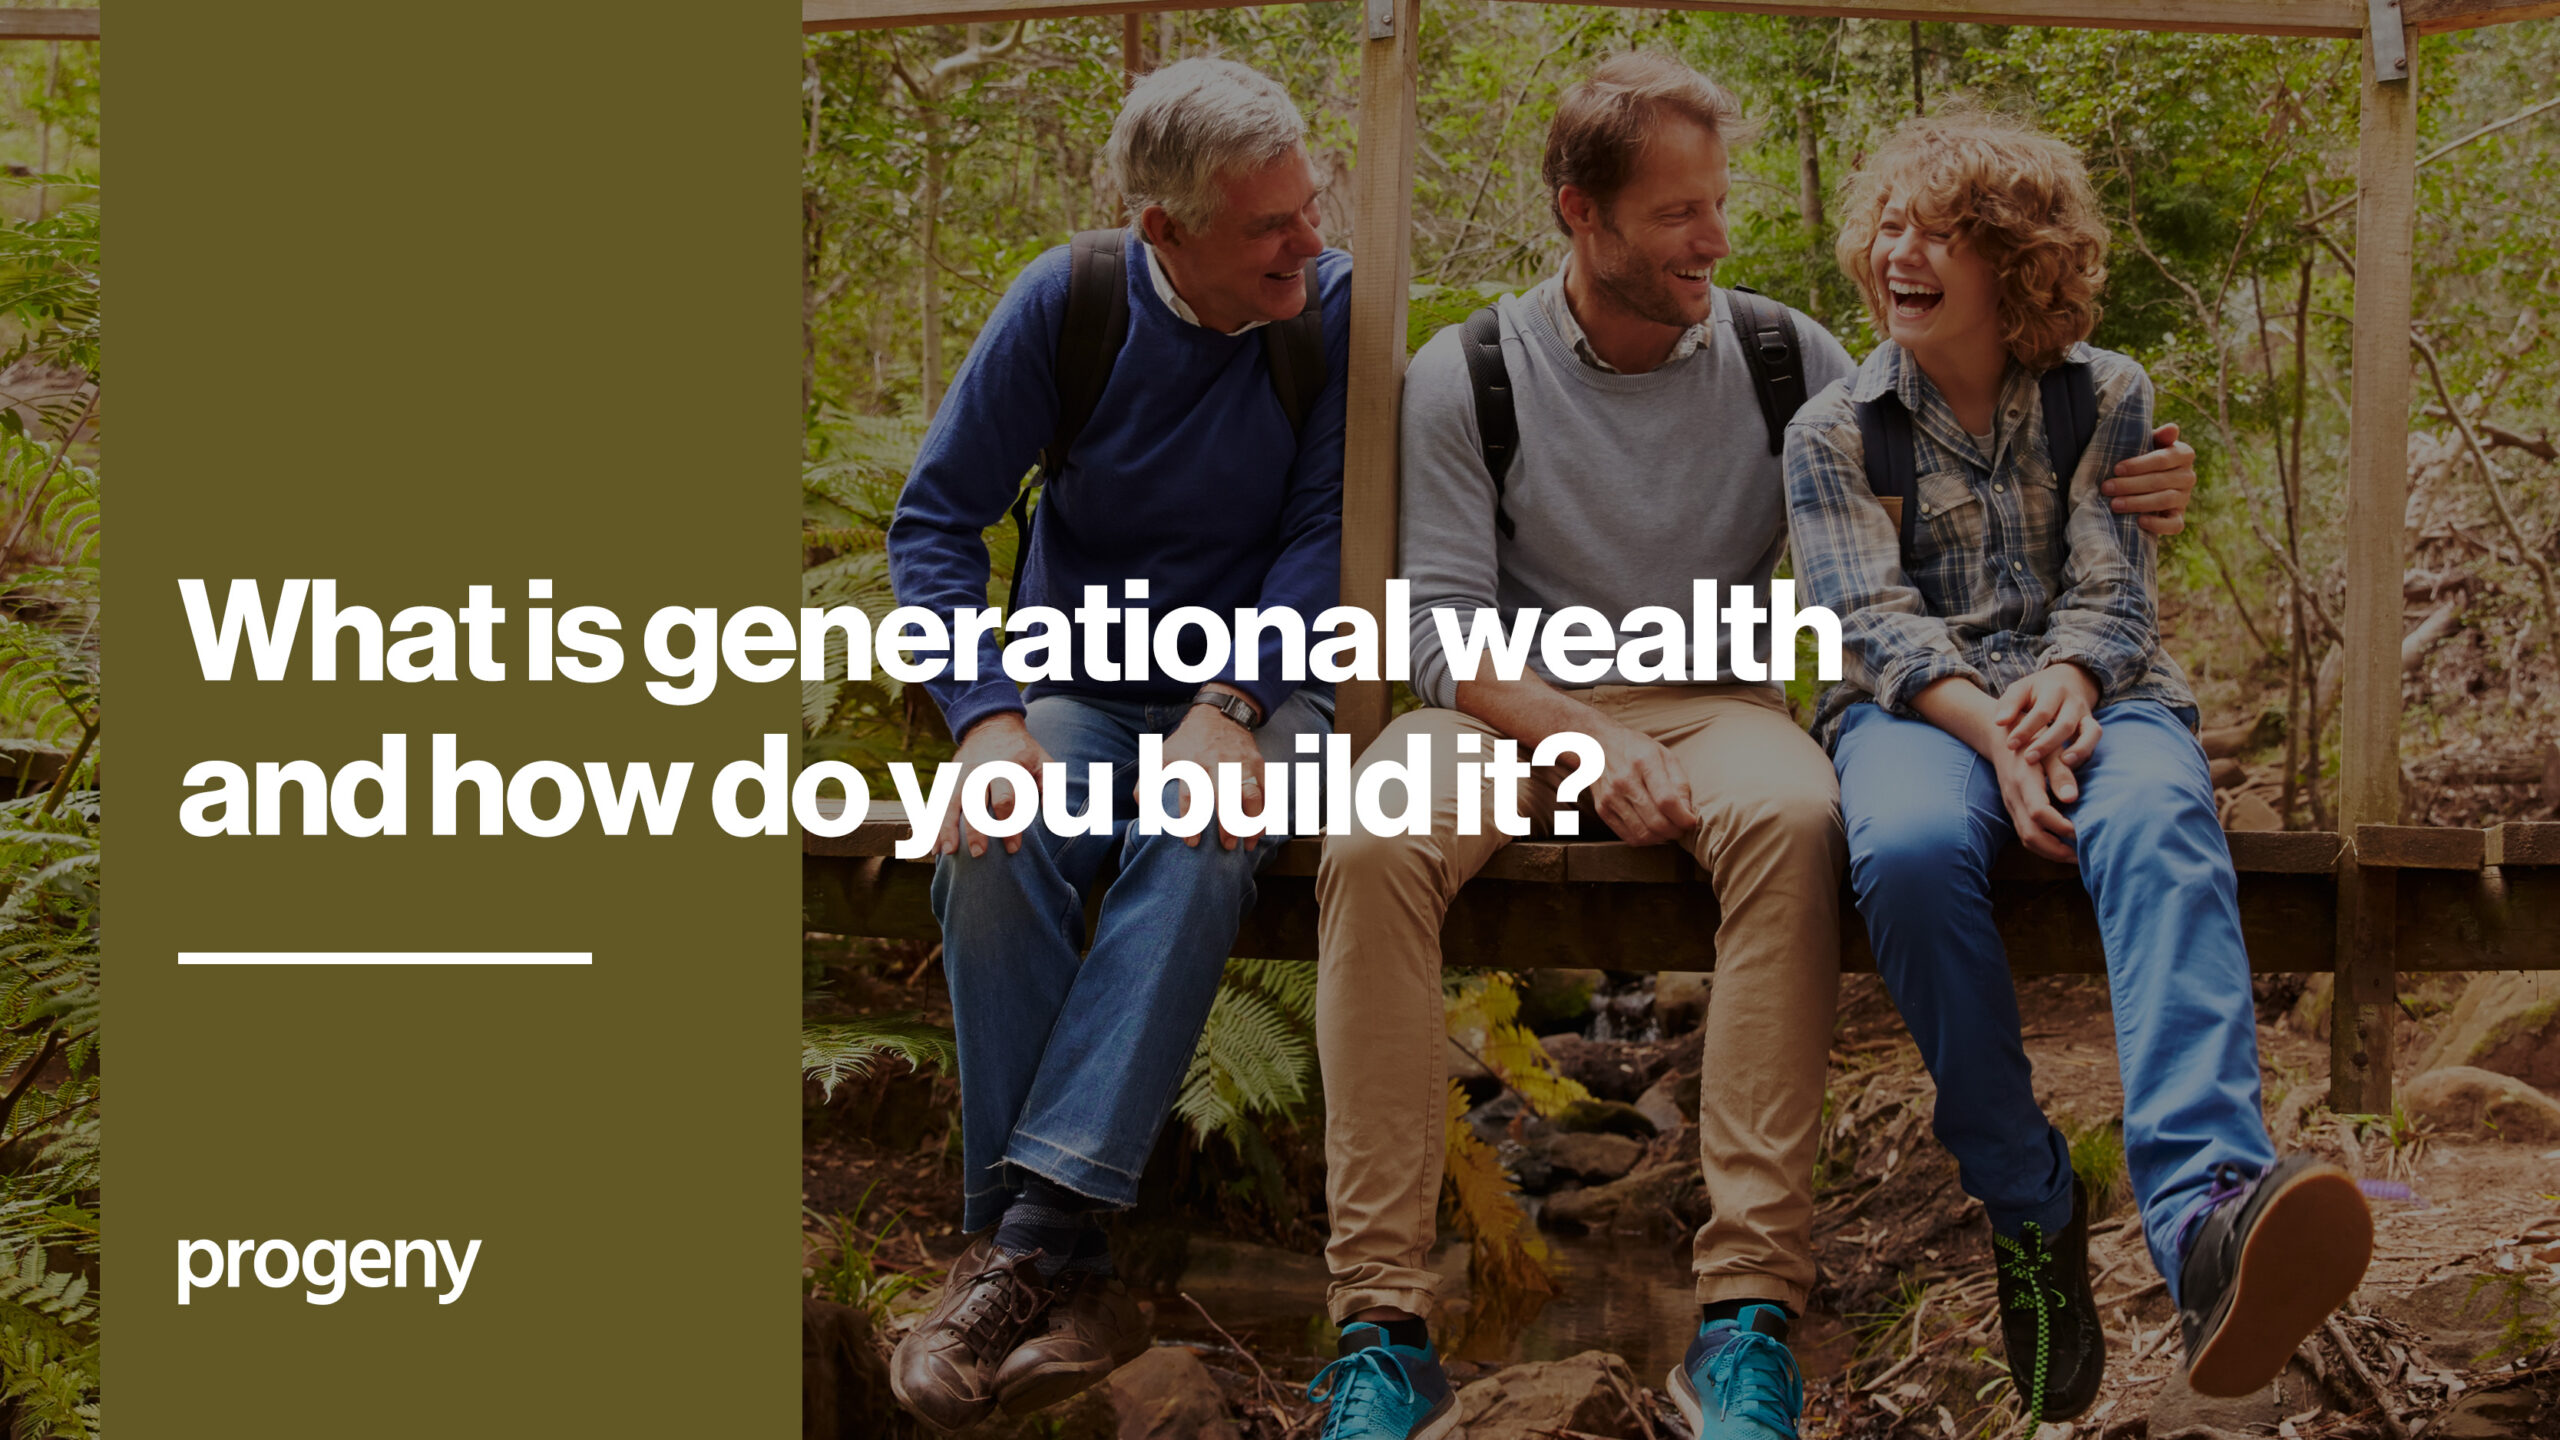 What is generational wealth and how to build it